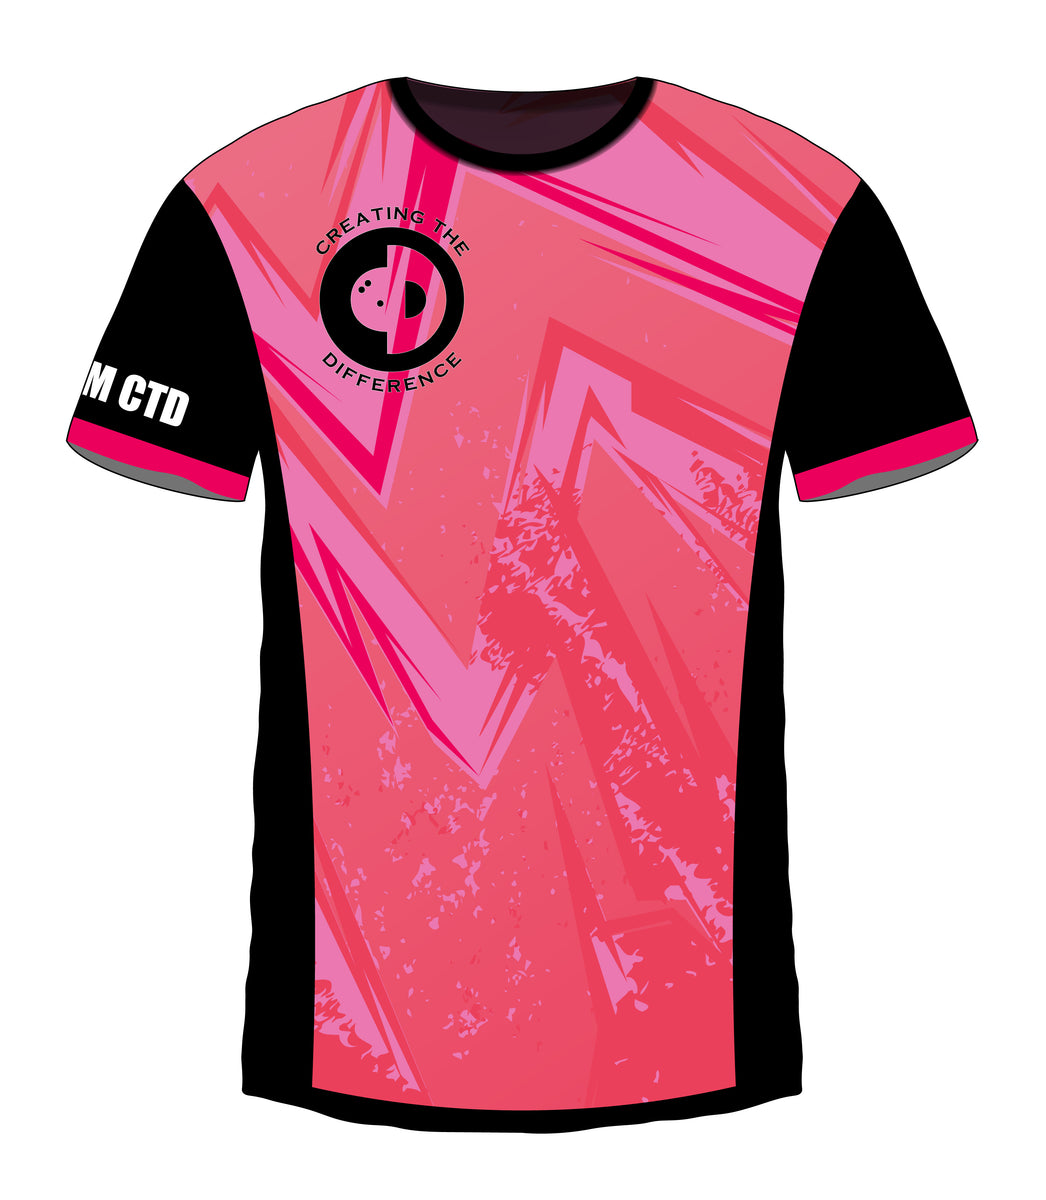 jagged Bowling pink Difference jersey the | Shirts Creating |